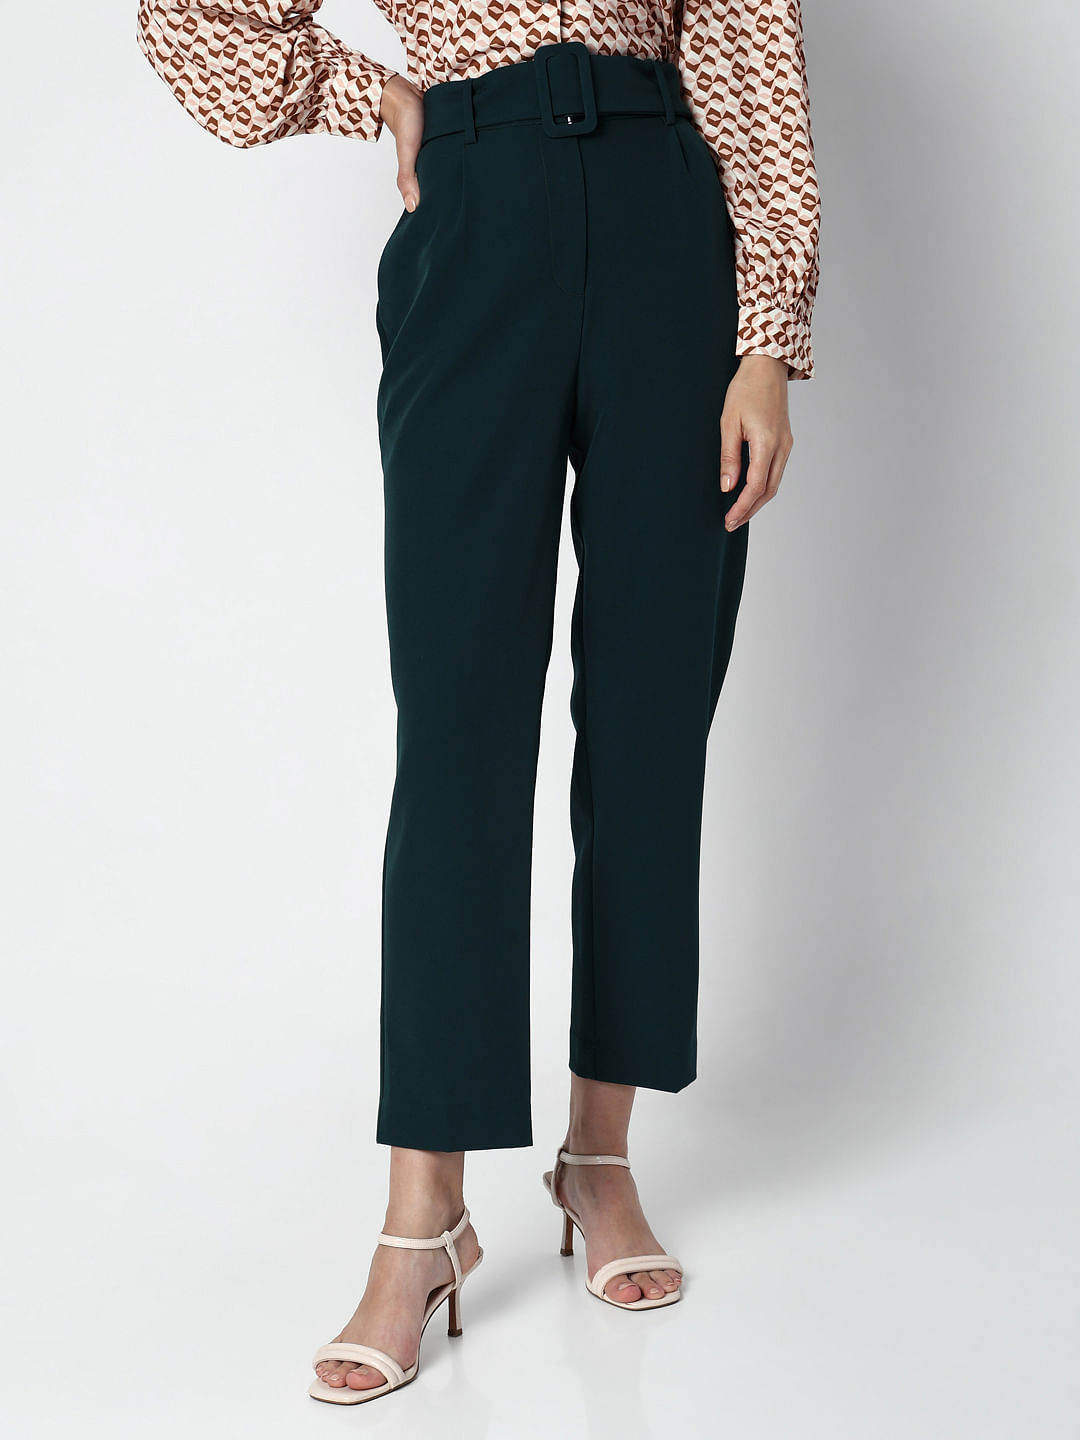 High-waisted trousers for petite women and how to style them